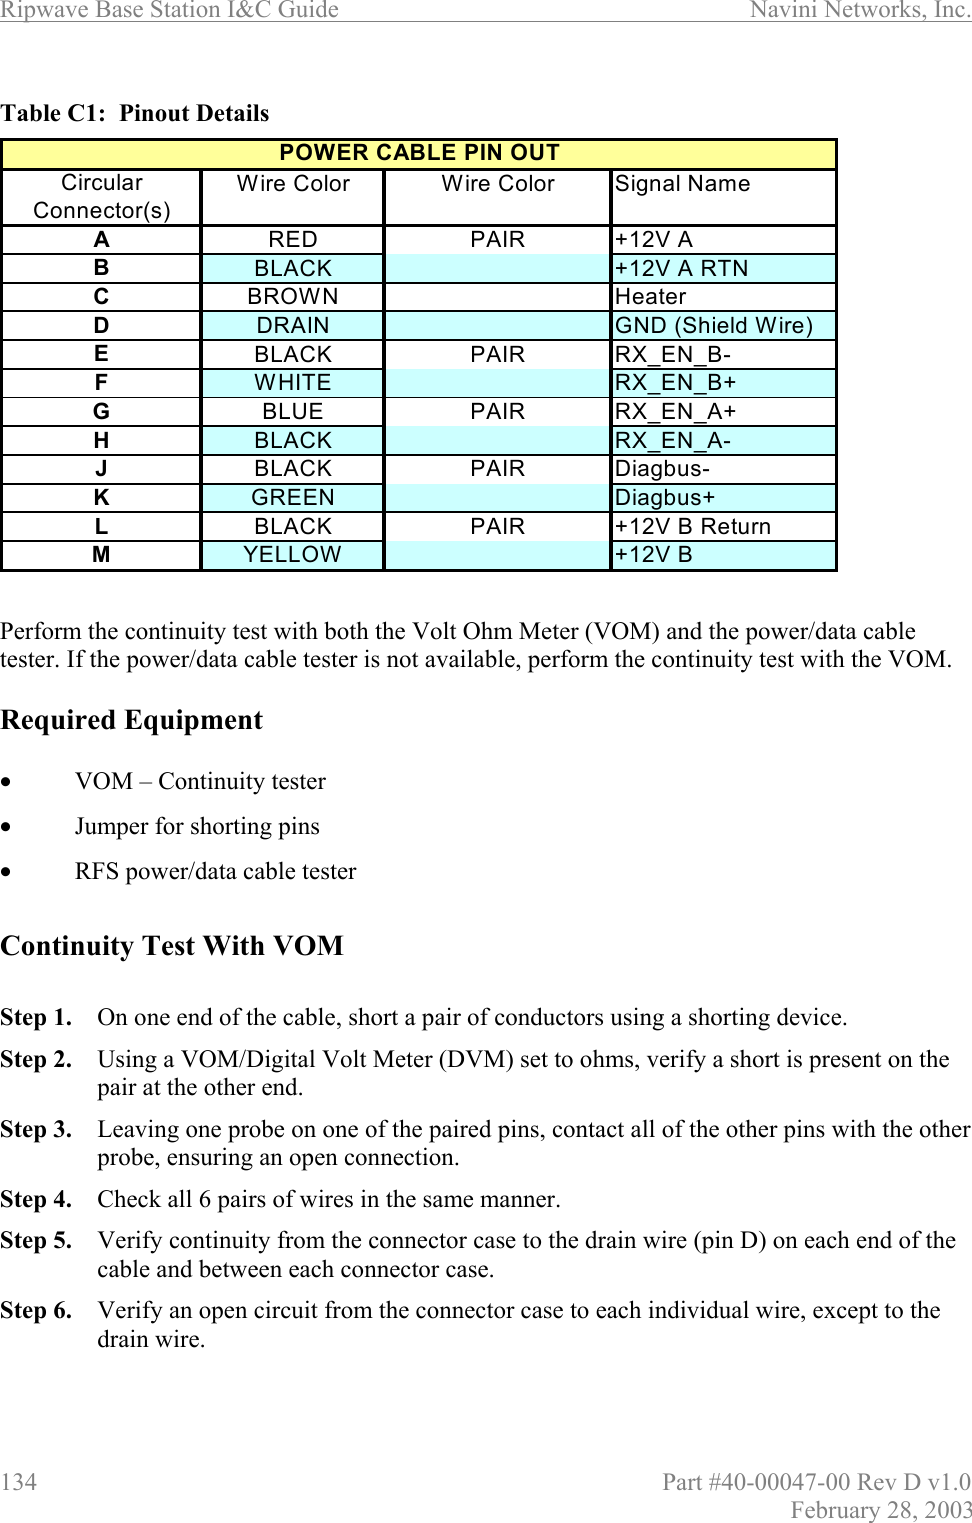 Ripwave Base Station I&amp;C Guide                      Navini Networks, Inc. 134                          Part #40-00047-00 Rev D v1.0 February 28, 2003  Table C1:  Pinout Details                  Perform the continuity test with both the Volt Ohm Meter (VOM) and the power/data cable tester. If the power/data cable tester is not available, perform the continuity test with the VOM.  Required Equipment  •  VOM – Continuity tester •  Jumper for shorting pins •  RFS power/data cable tester  Continuity Test With VOM  Step 1.  On one end of the cable, short a pair of conductors using a shorting device.  Step 2.  Using a VOM/Digital Volt Meter (DVM) set to ohms, verify a short is present on the pair at the other end.  Step 3.  Leaving one probe on one of the paired pins, contact all of the other pins with the other probe, ensuring an open connection.  Step 4.  Check all 6 pairs of wires in the same manner.  Step 5.  Verify continuity from the connector case to the drain wire (pin D) on each end of the cable and between each connector case. Step 6.  Verify an open circuit from the connector case to each individual wire, except to the drain wire. Wire Color Wire Color Signal NameRED PAIR +12V ABLACK +12V A RTNBROWN HeaterDRAIN GND (Shield Wire)BLACK PAIR RX_EN_B-WHITE RX_EN_B+BLUE PAIR RX_EN_A+BLACK RX_EN_A-BLACK PAIR Diagbus-GREEN Diagbus+BLACK PAIR +12V B ReturnYELLOW +12V BPOWER CABLE PIN OUTABCDCircularConnector(s)JKLMEFGH